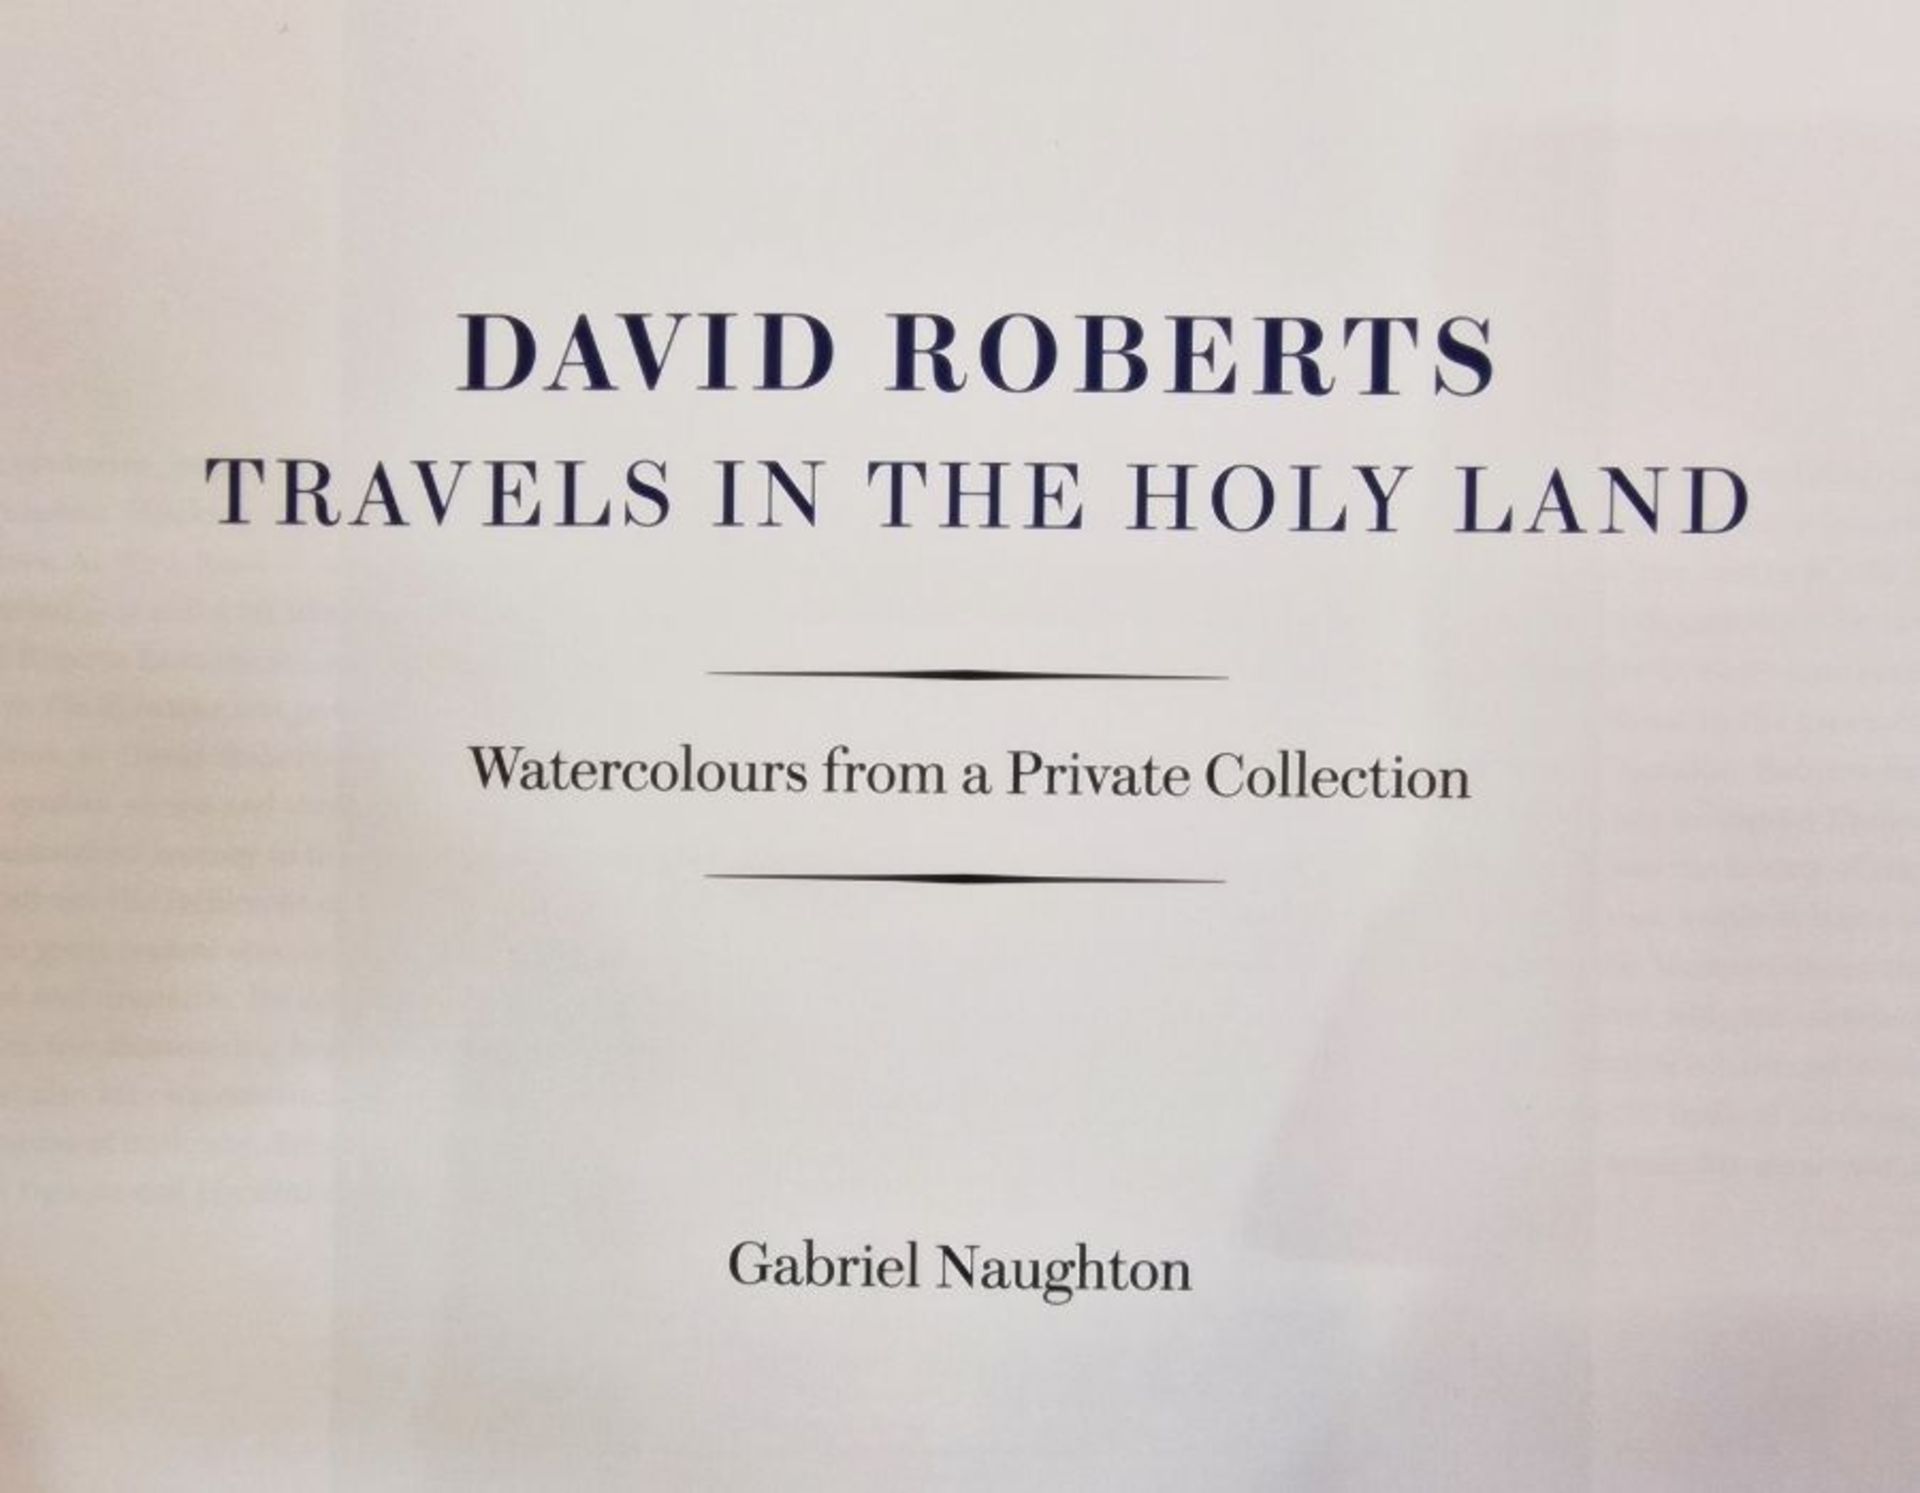 Naughton, Gabriel (ed)  "David Roberts, Travels in the Holy Land, Watercolours from a Private - Image 6 of 8